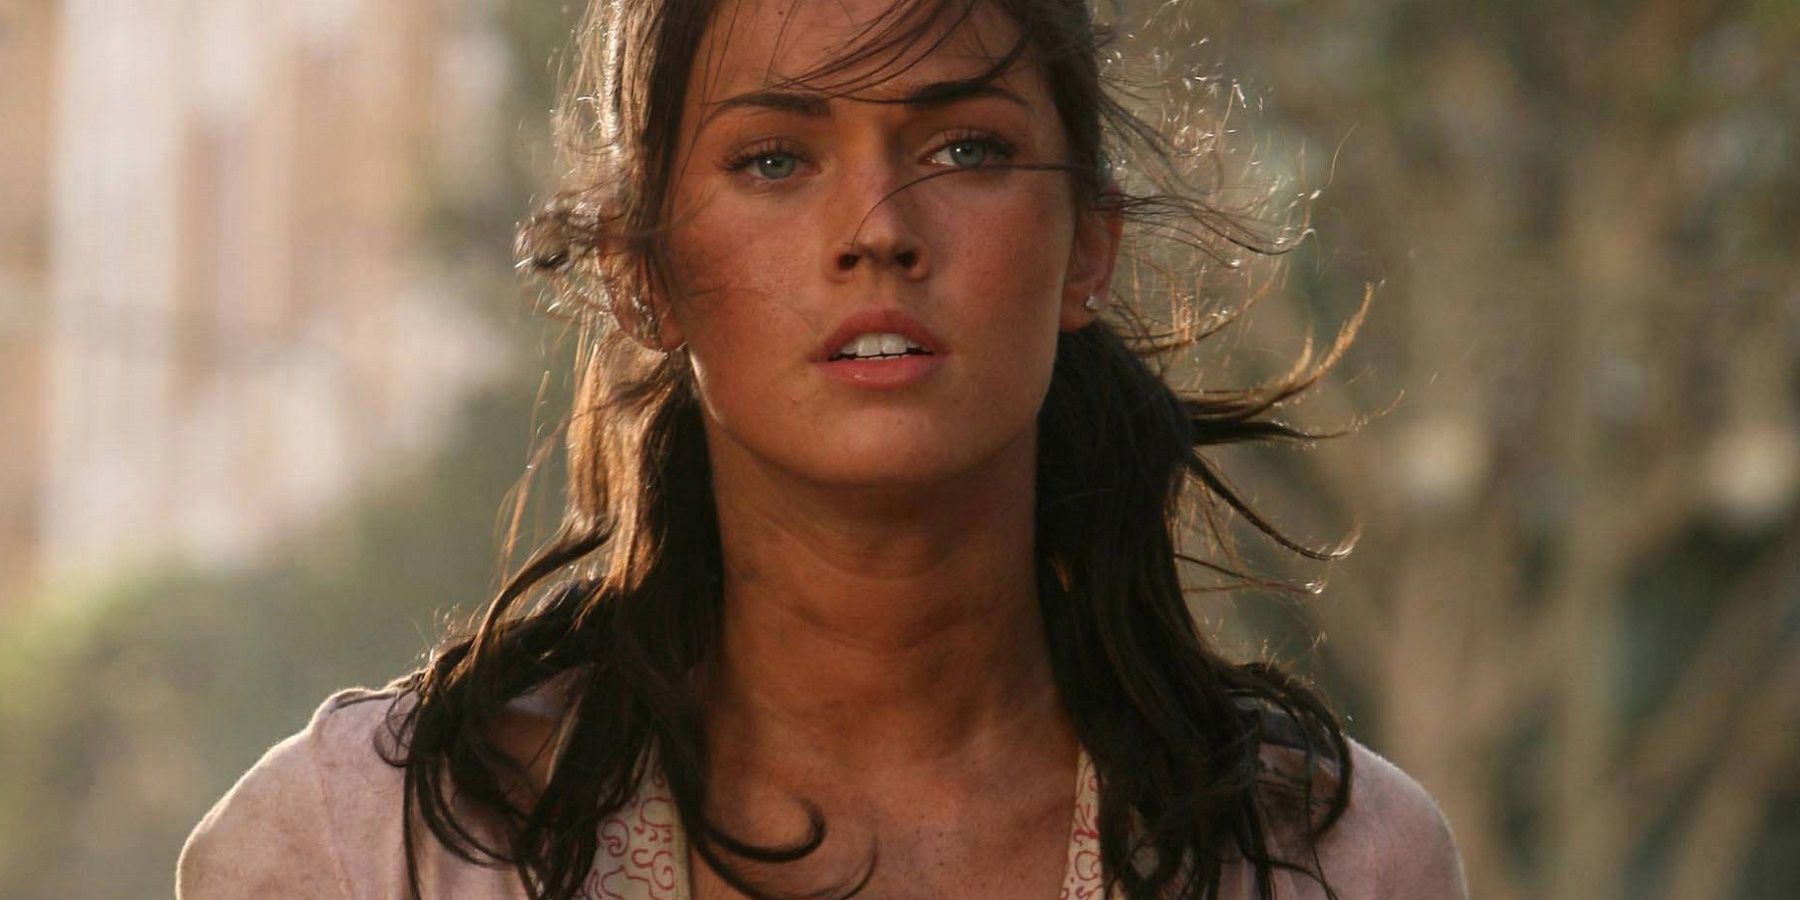 Megan Fox as Mikaela Banes with windswept hair in Transformers